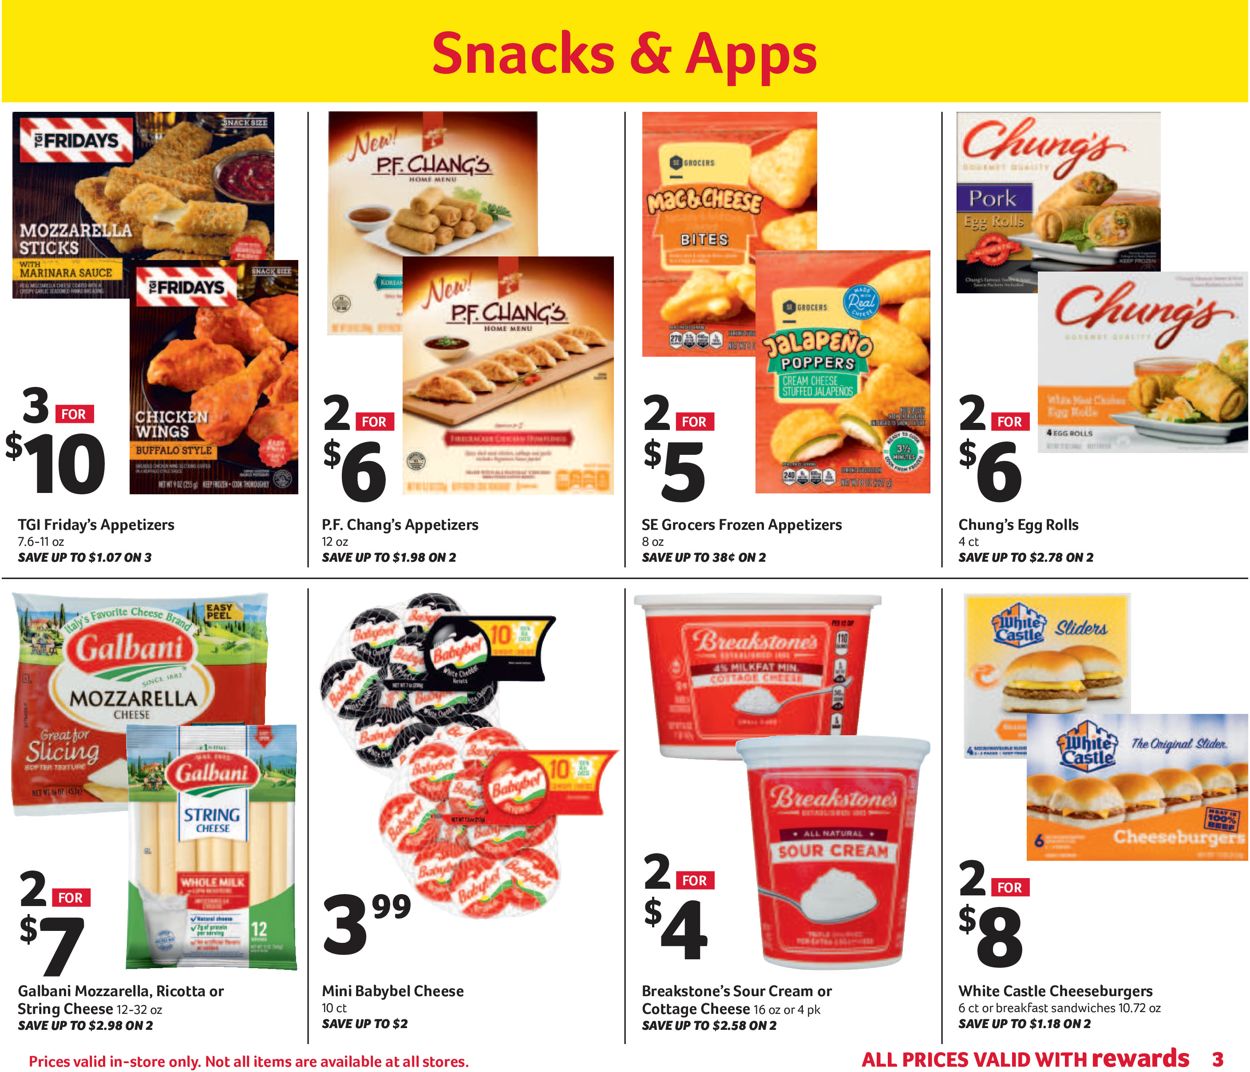 Catalogue BI-LO from 10/02/2019